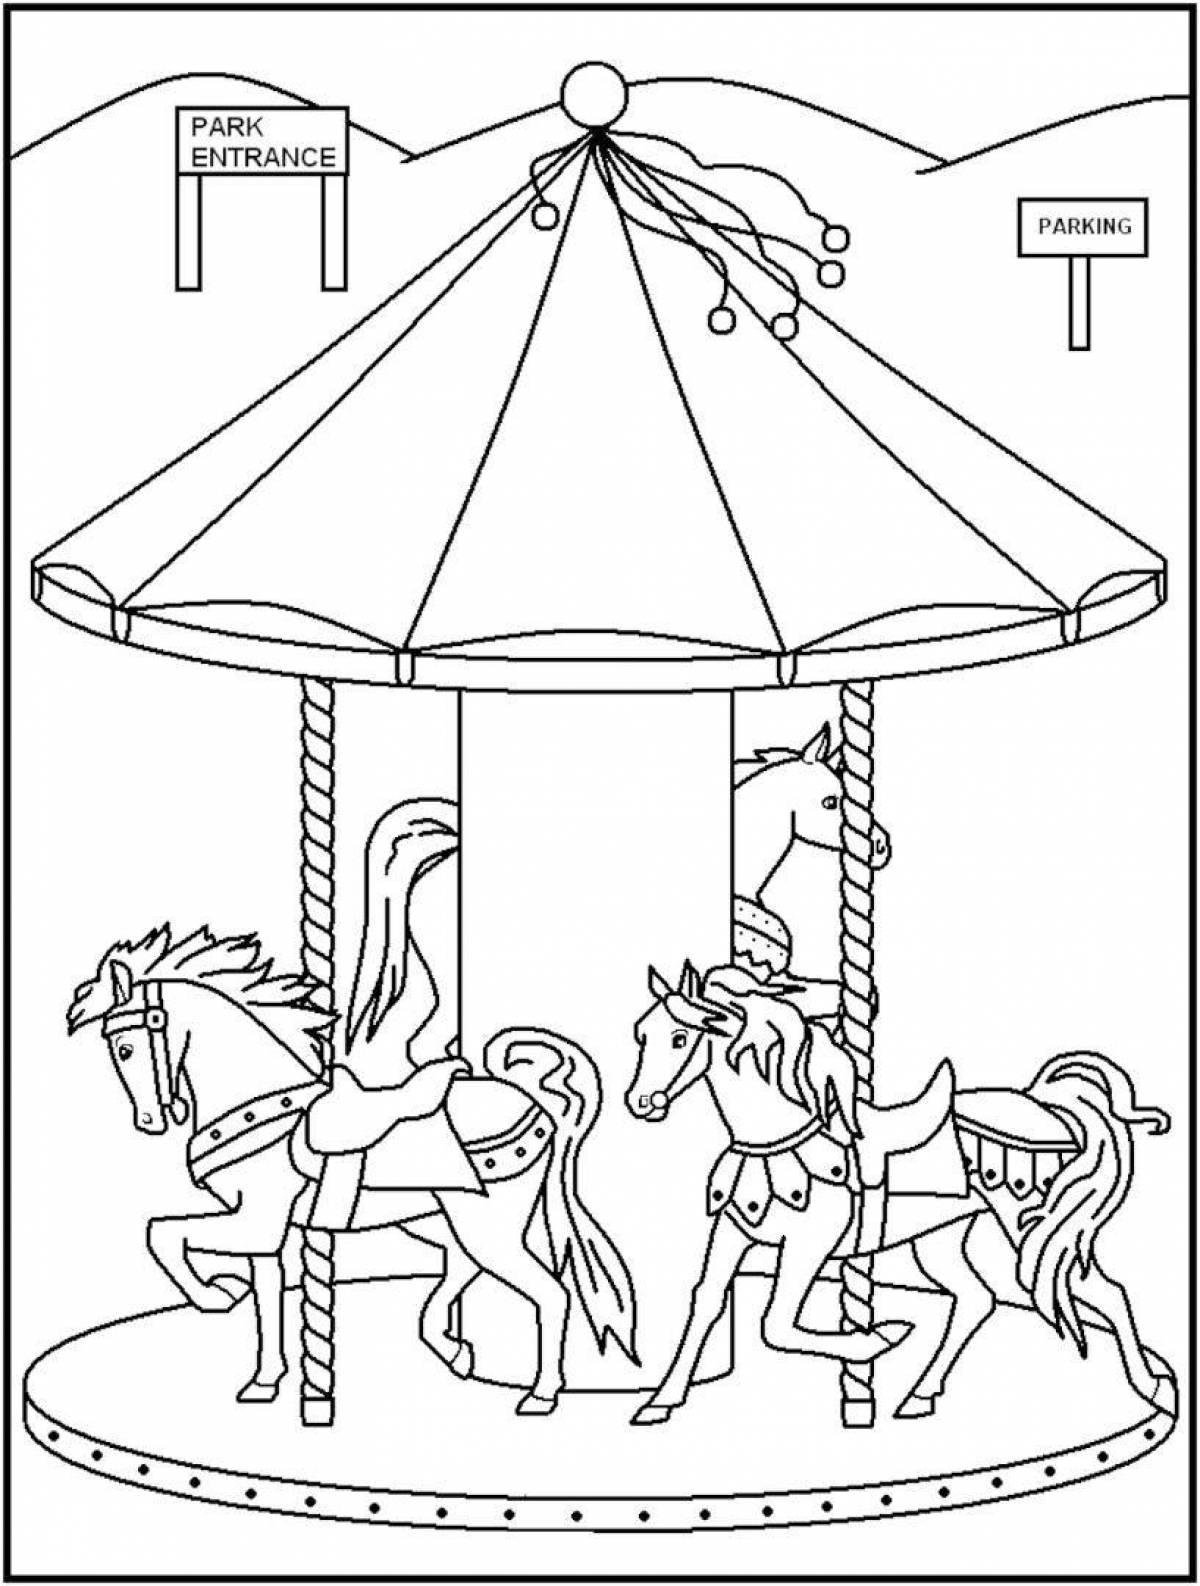 Colorful carousel coloring book for kids